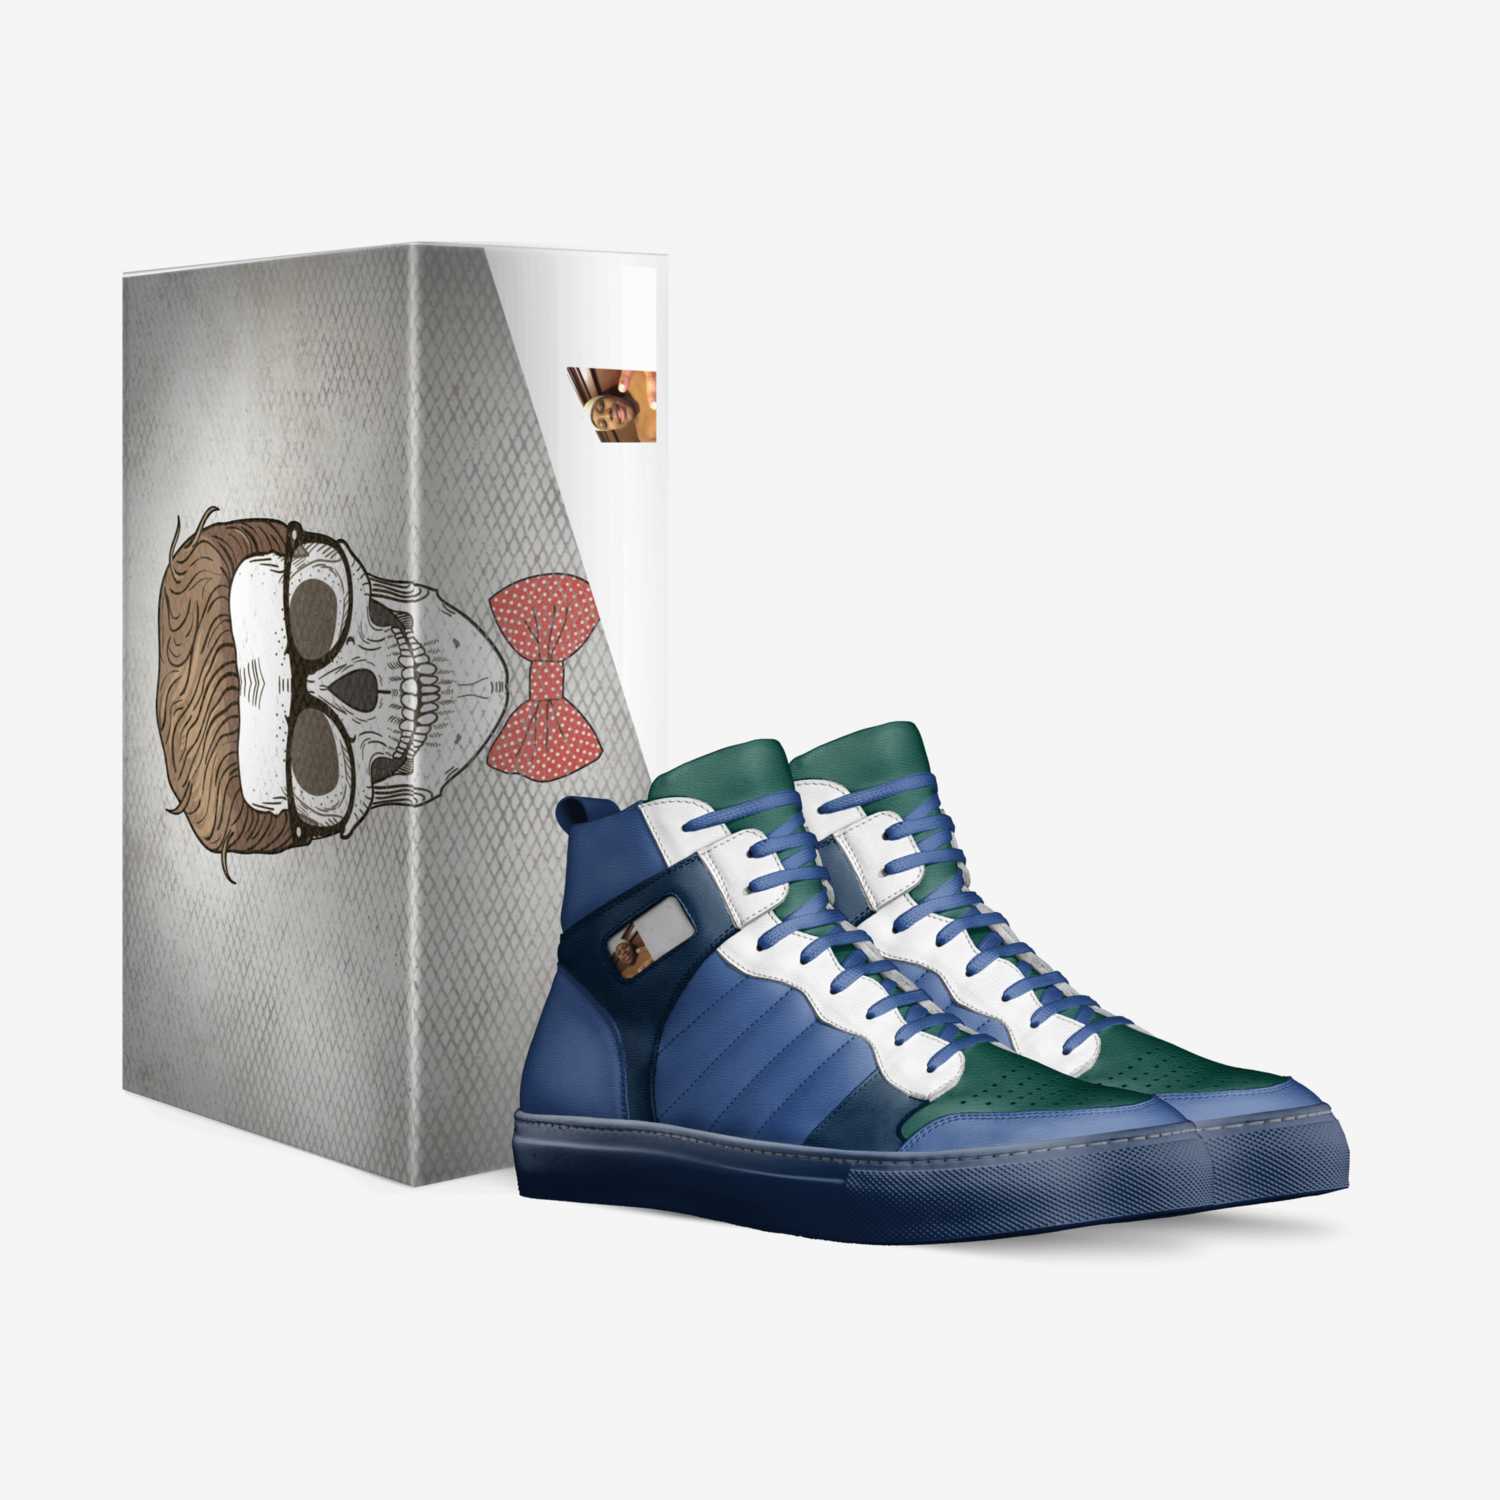 Malicah custom made in Italy shoes by Rowland Williams | Box view